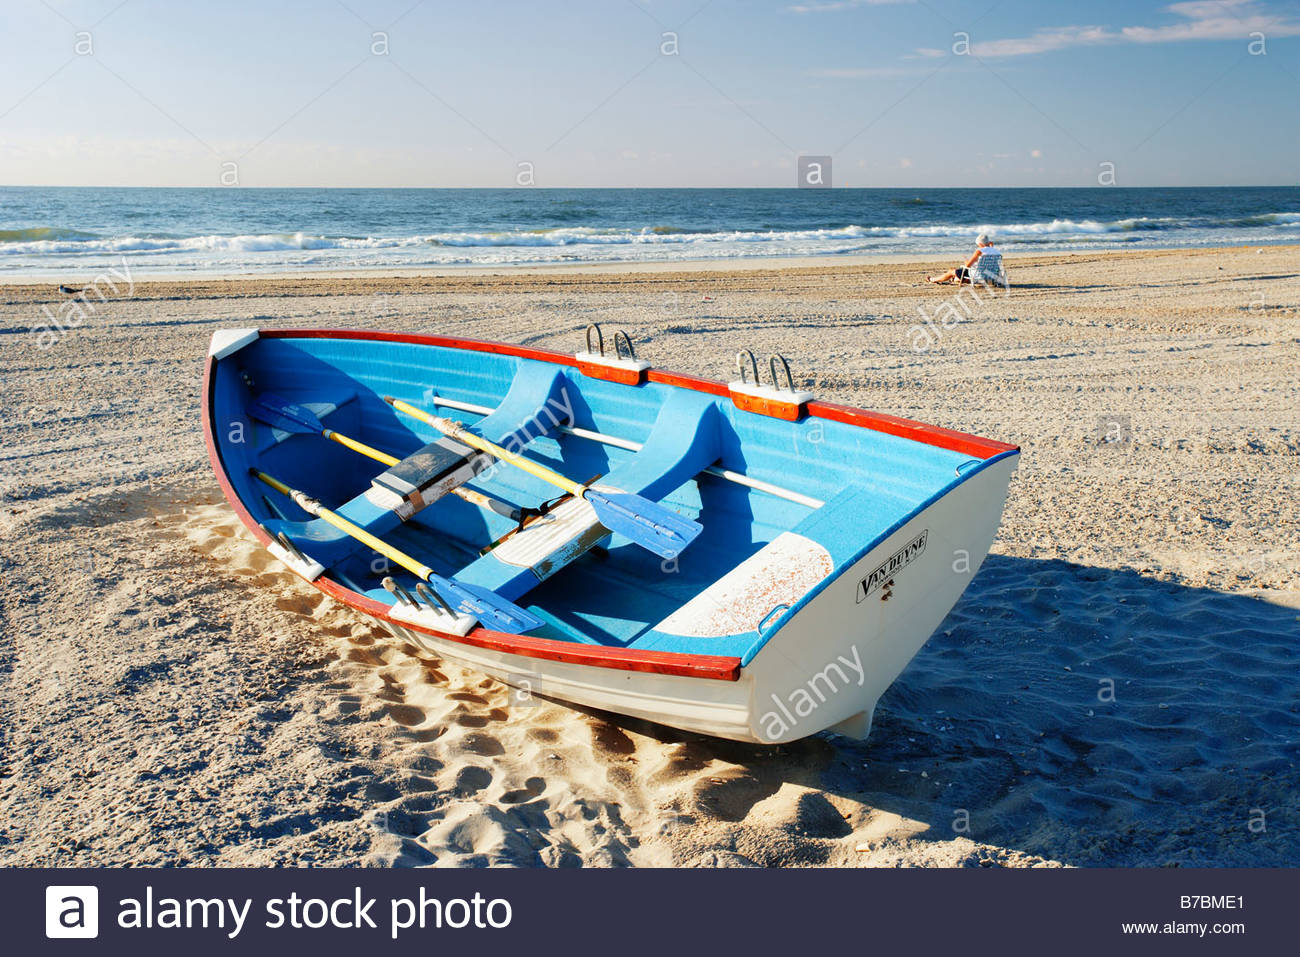 Mature Man In Background Sitting On Beach And Small Boat New